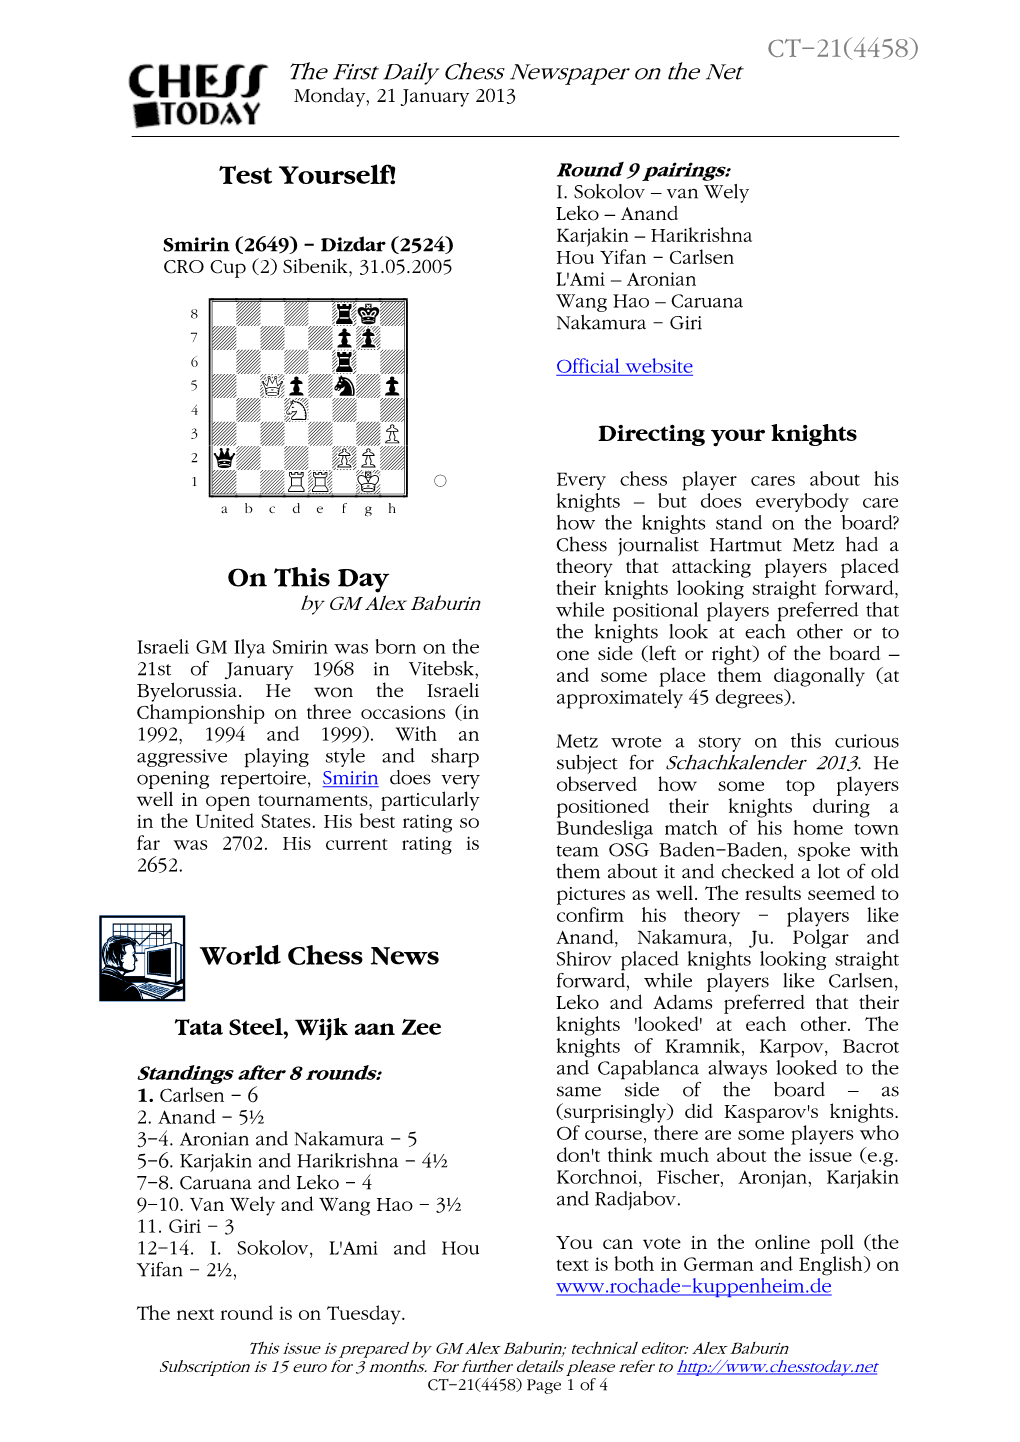 On This Day World Chess News CT-21(4458)